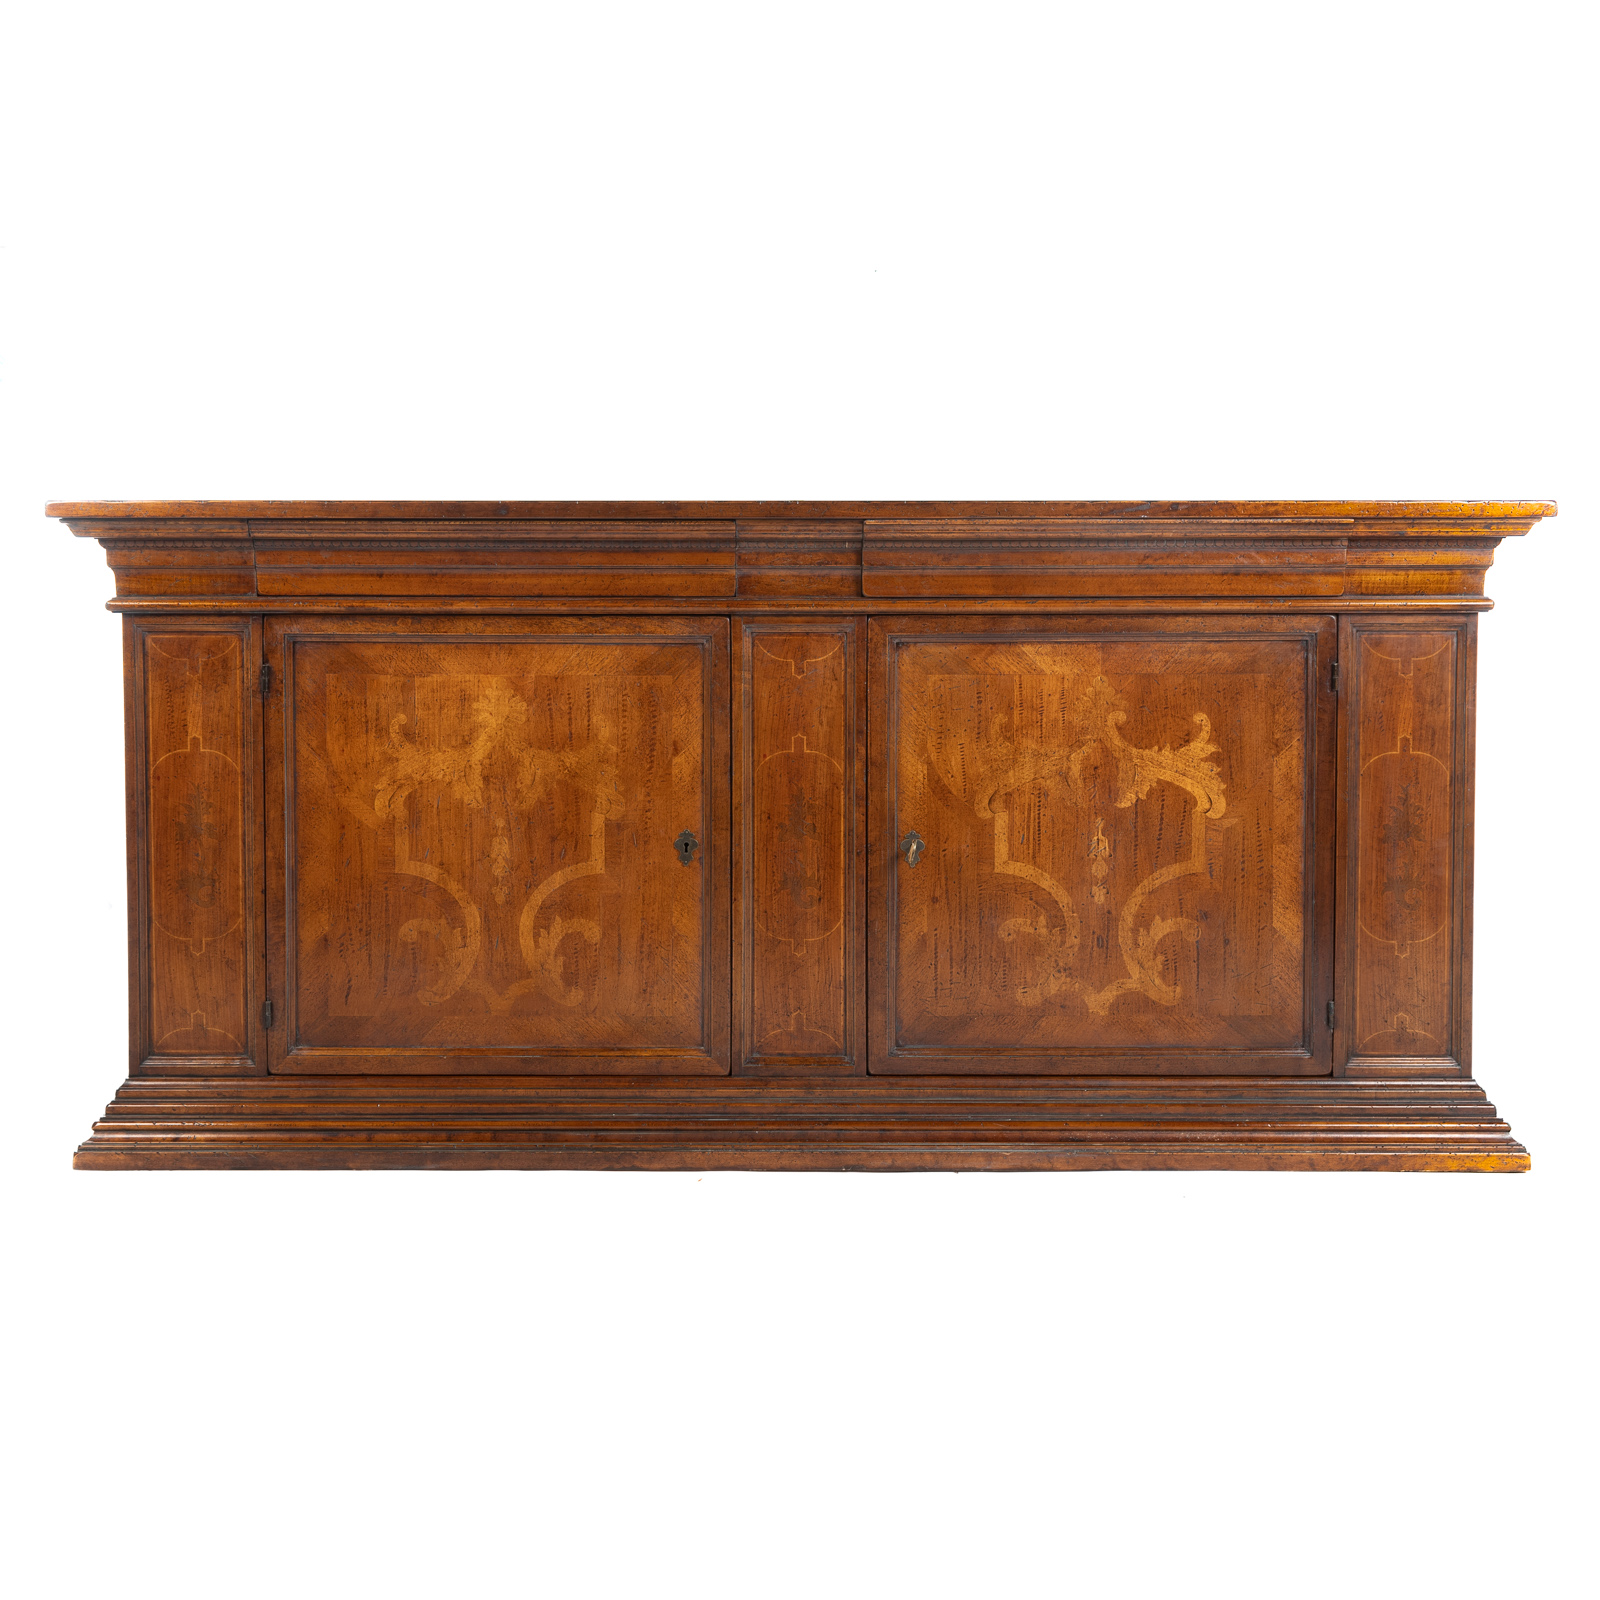 CONTINENTAL STYLE INLAID BUFFET 36a737